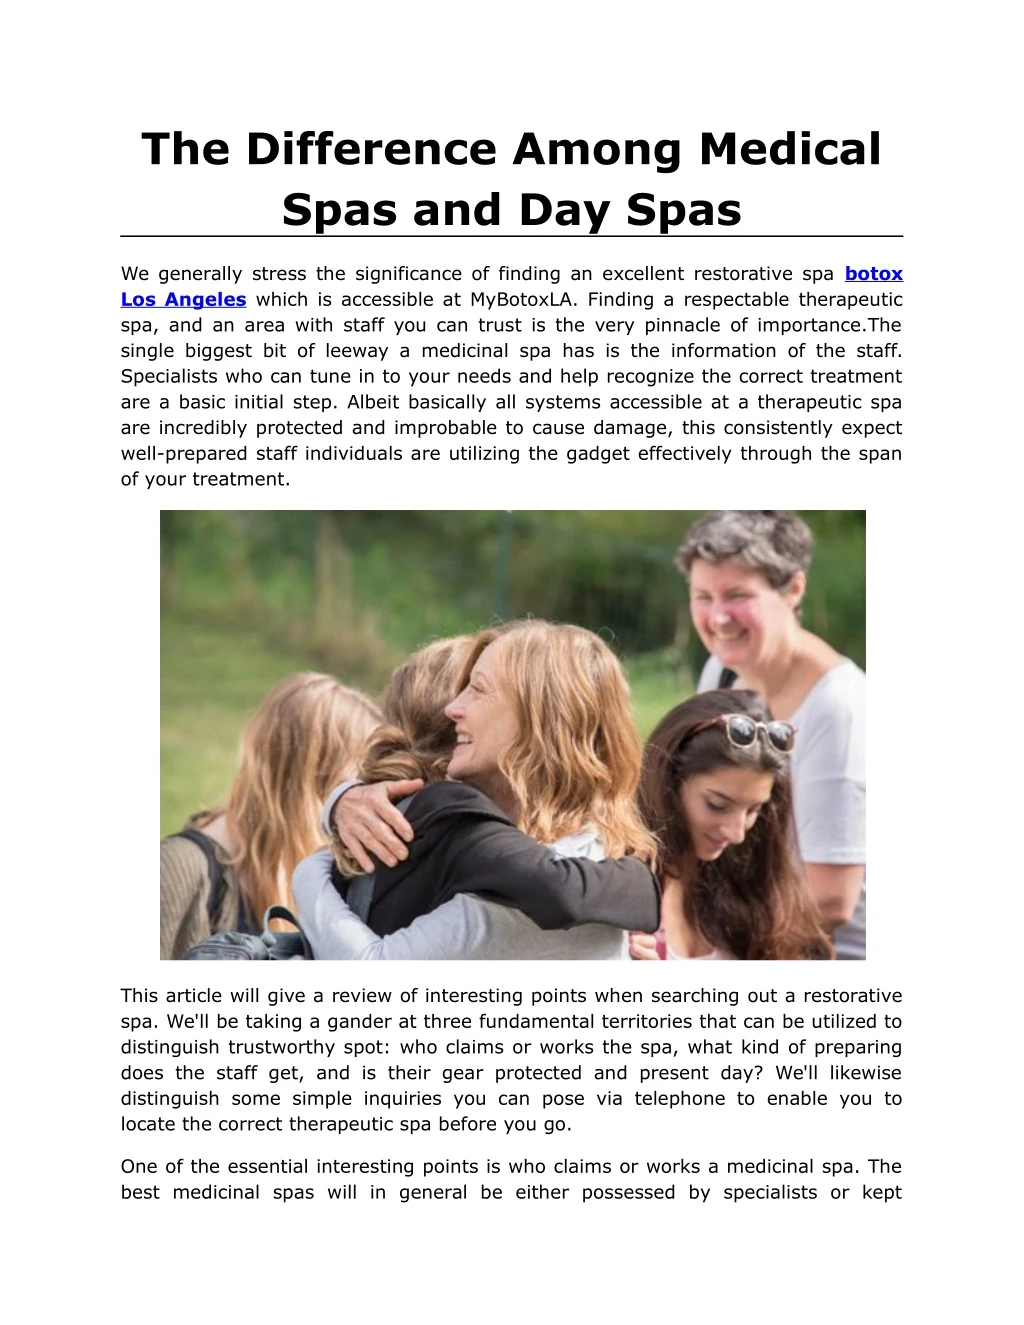 the difference among medical spas and day spas